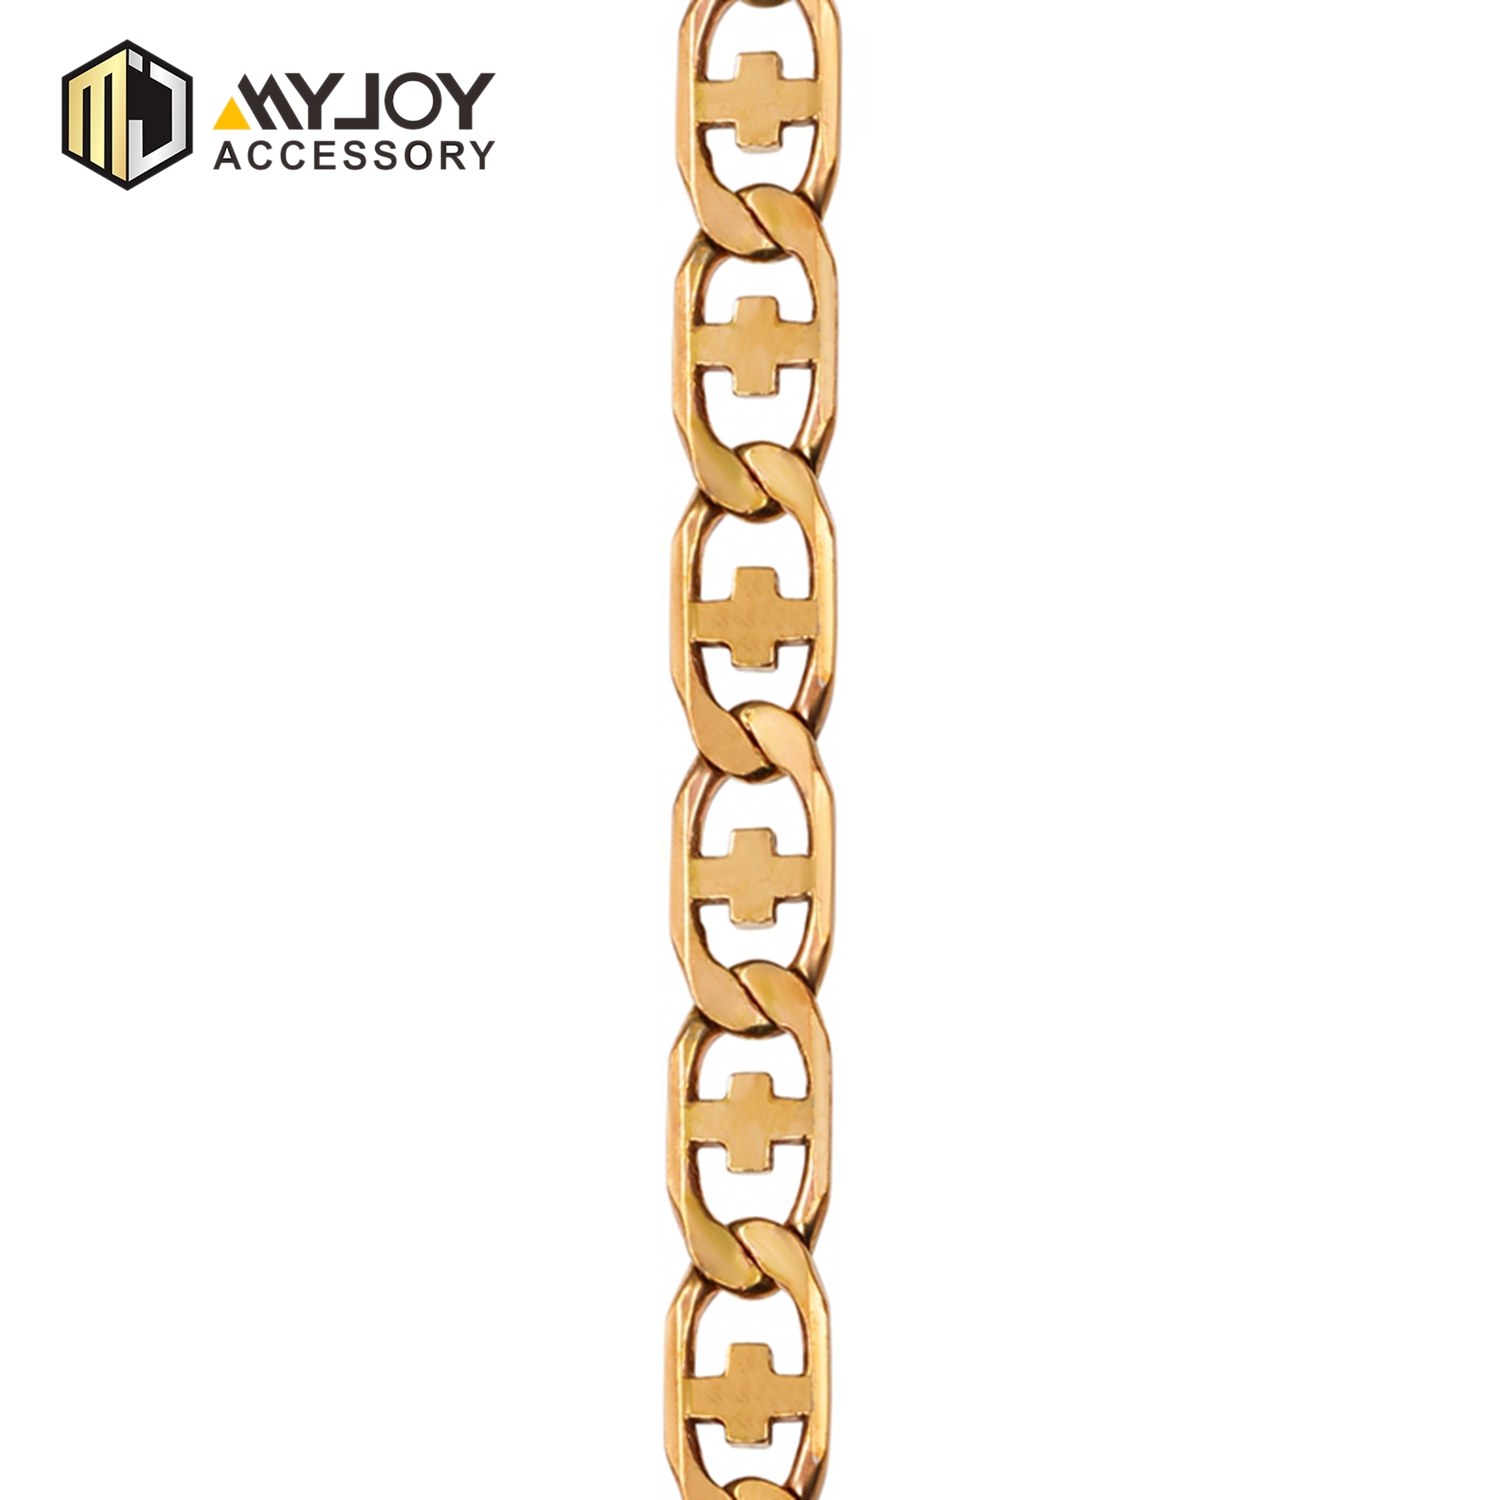 MYJOY chains purse chain for business for purses-2